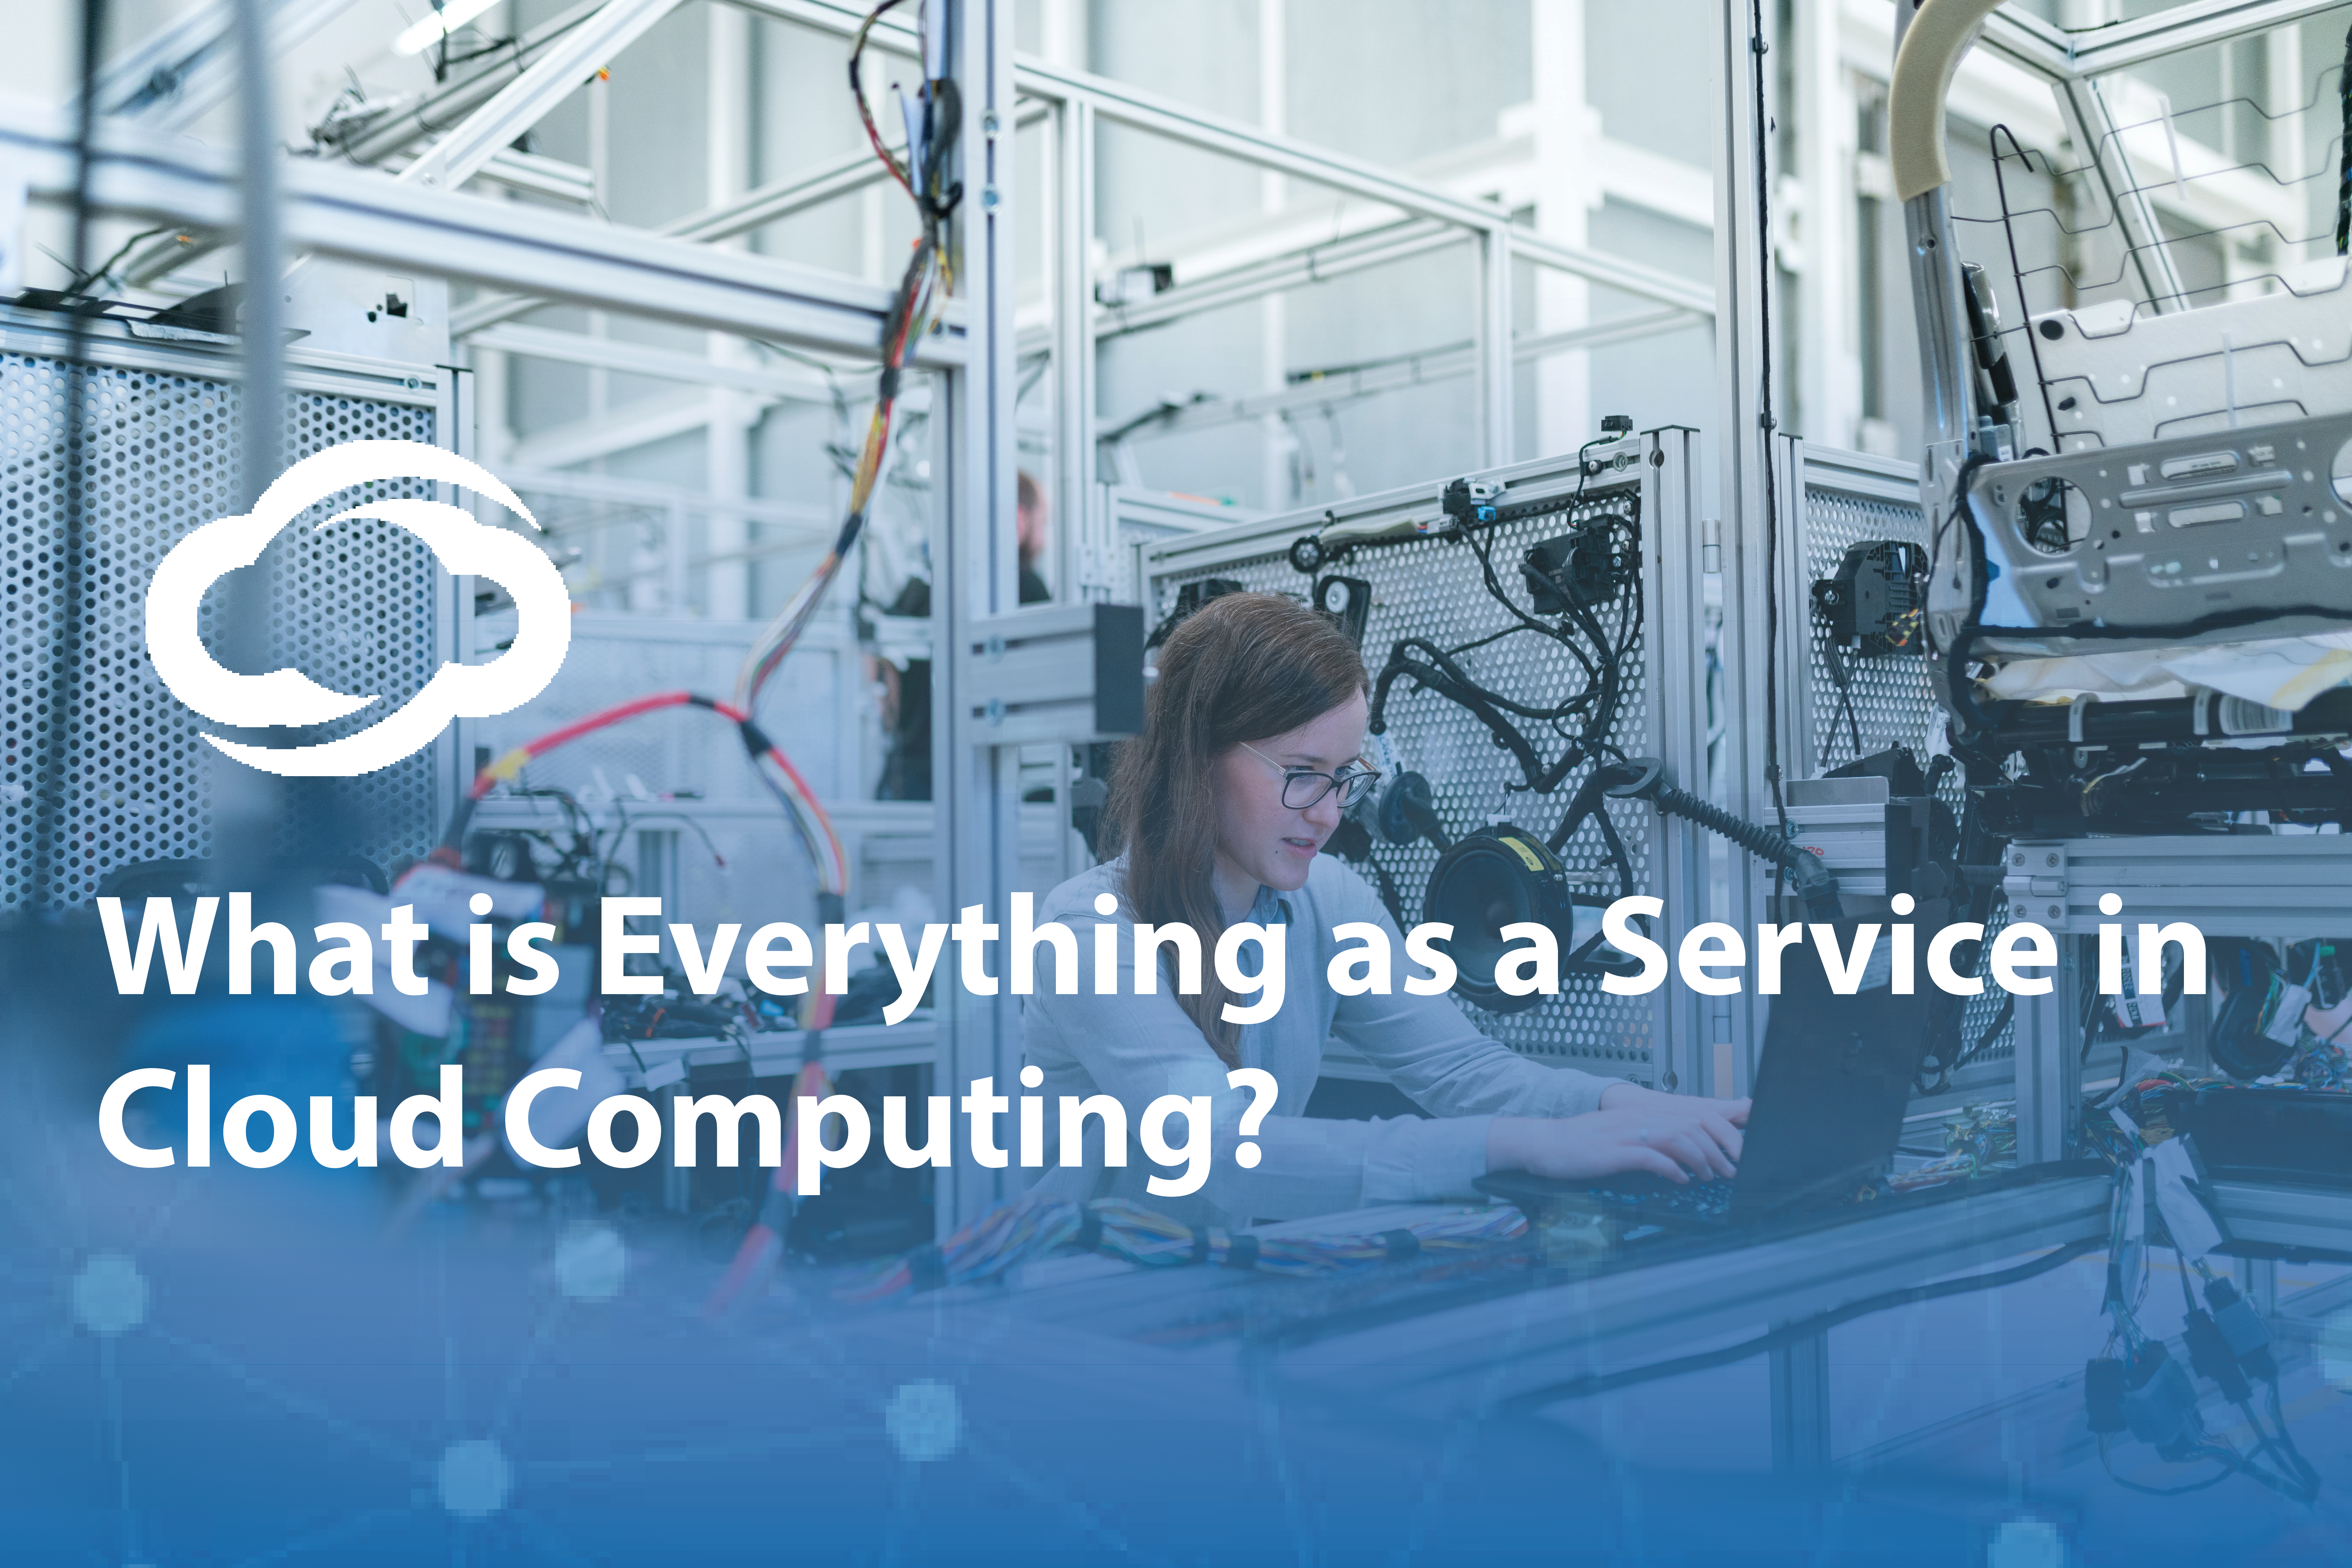 Blog Image - What is Everything as a Service in Cloud Computing